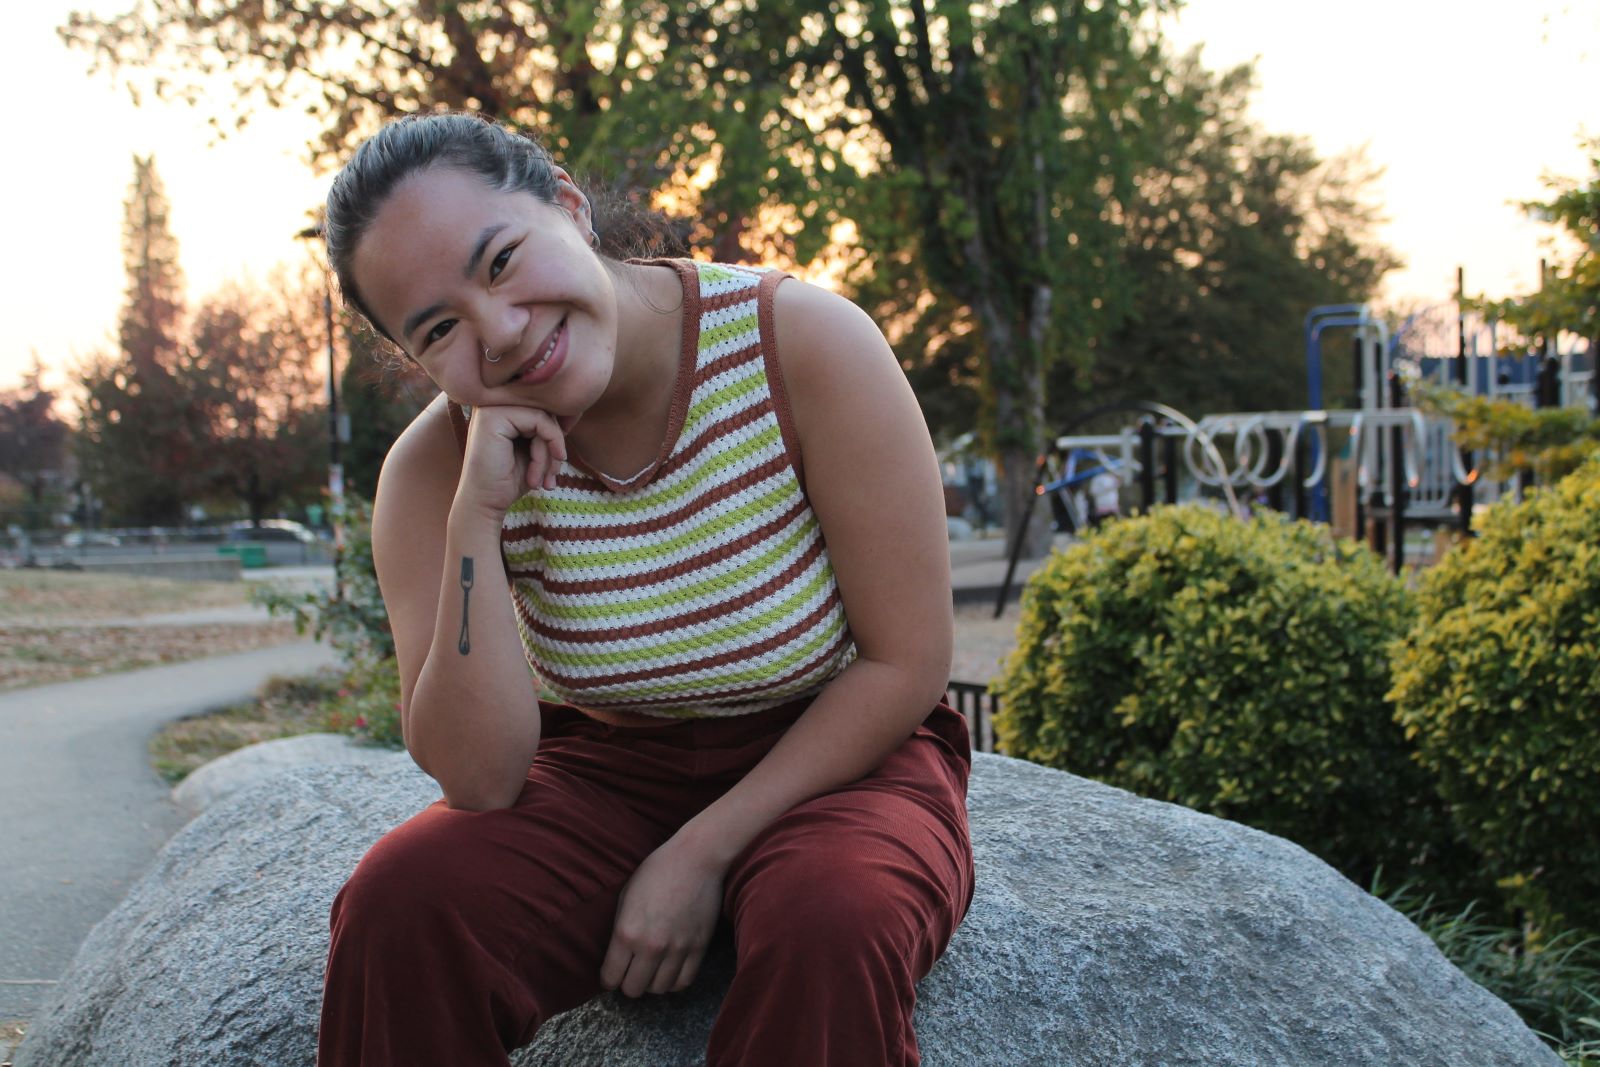 Rachel Lau is seated on a grey boulder in a park. Behind them are bushes, trees and a playground at sunset. They are wearing a green and brown striped sleeveless shirt, brown pants and white sneakers. They are looking at the camera with warmth.